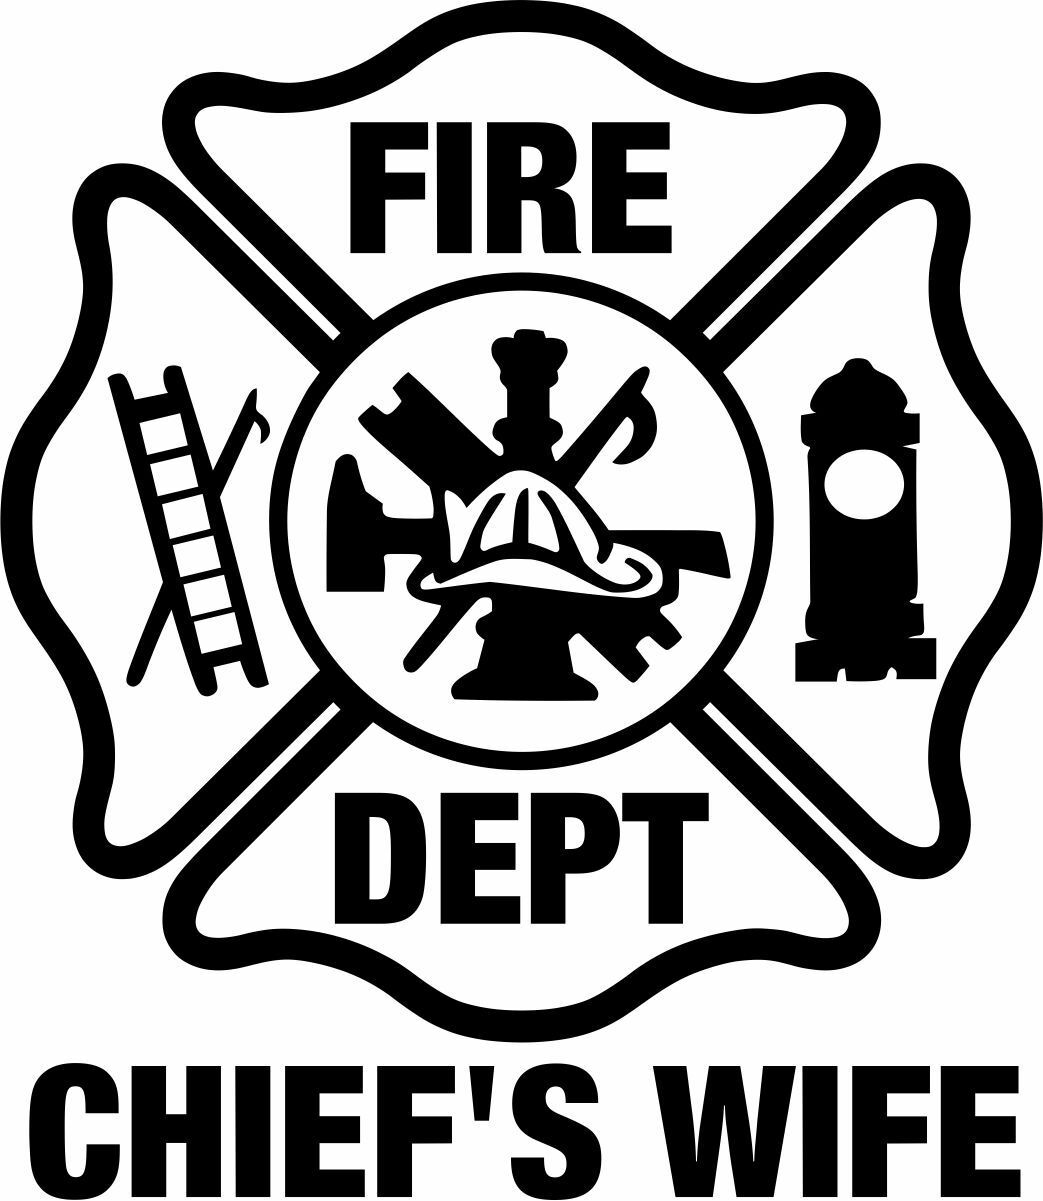 Chief's Wife Firefighter Window Sticker Various Sizes and colors Free Shipping - Powercall Sirens LLC